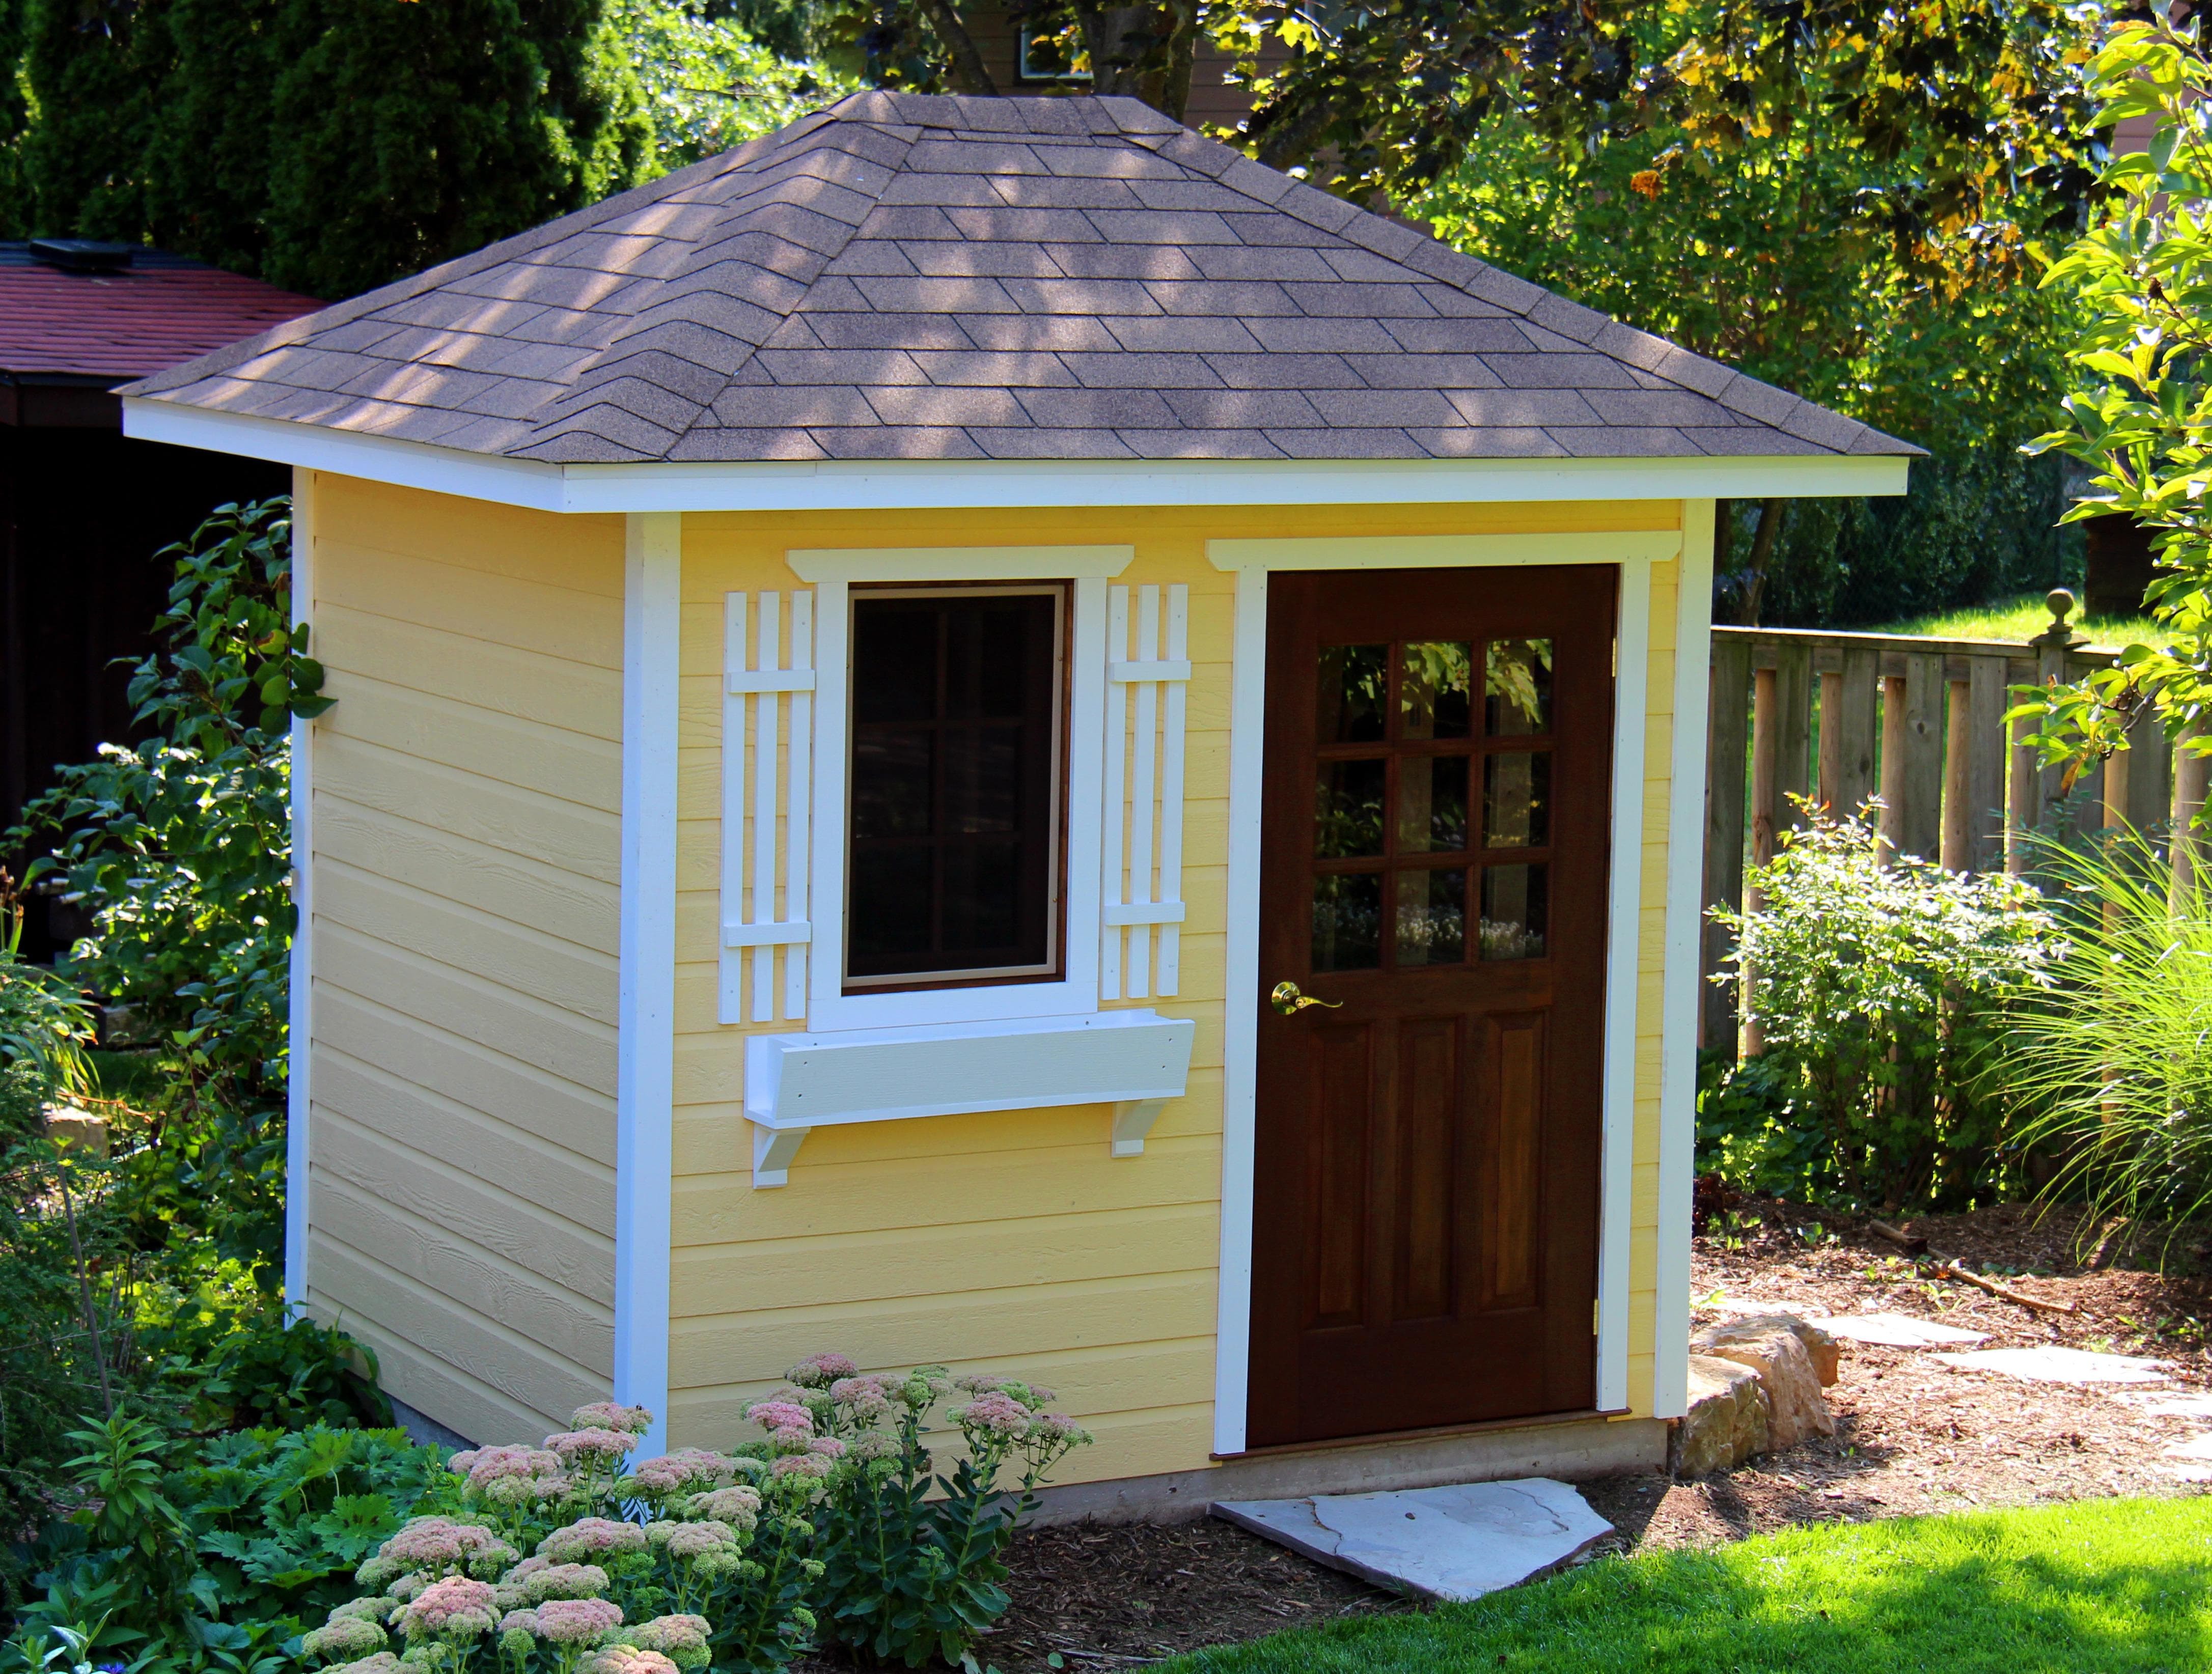 Sonoma 6x8 backyard shed with antique double door Madison Wisconsin. ID number 152810-1